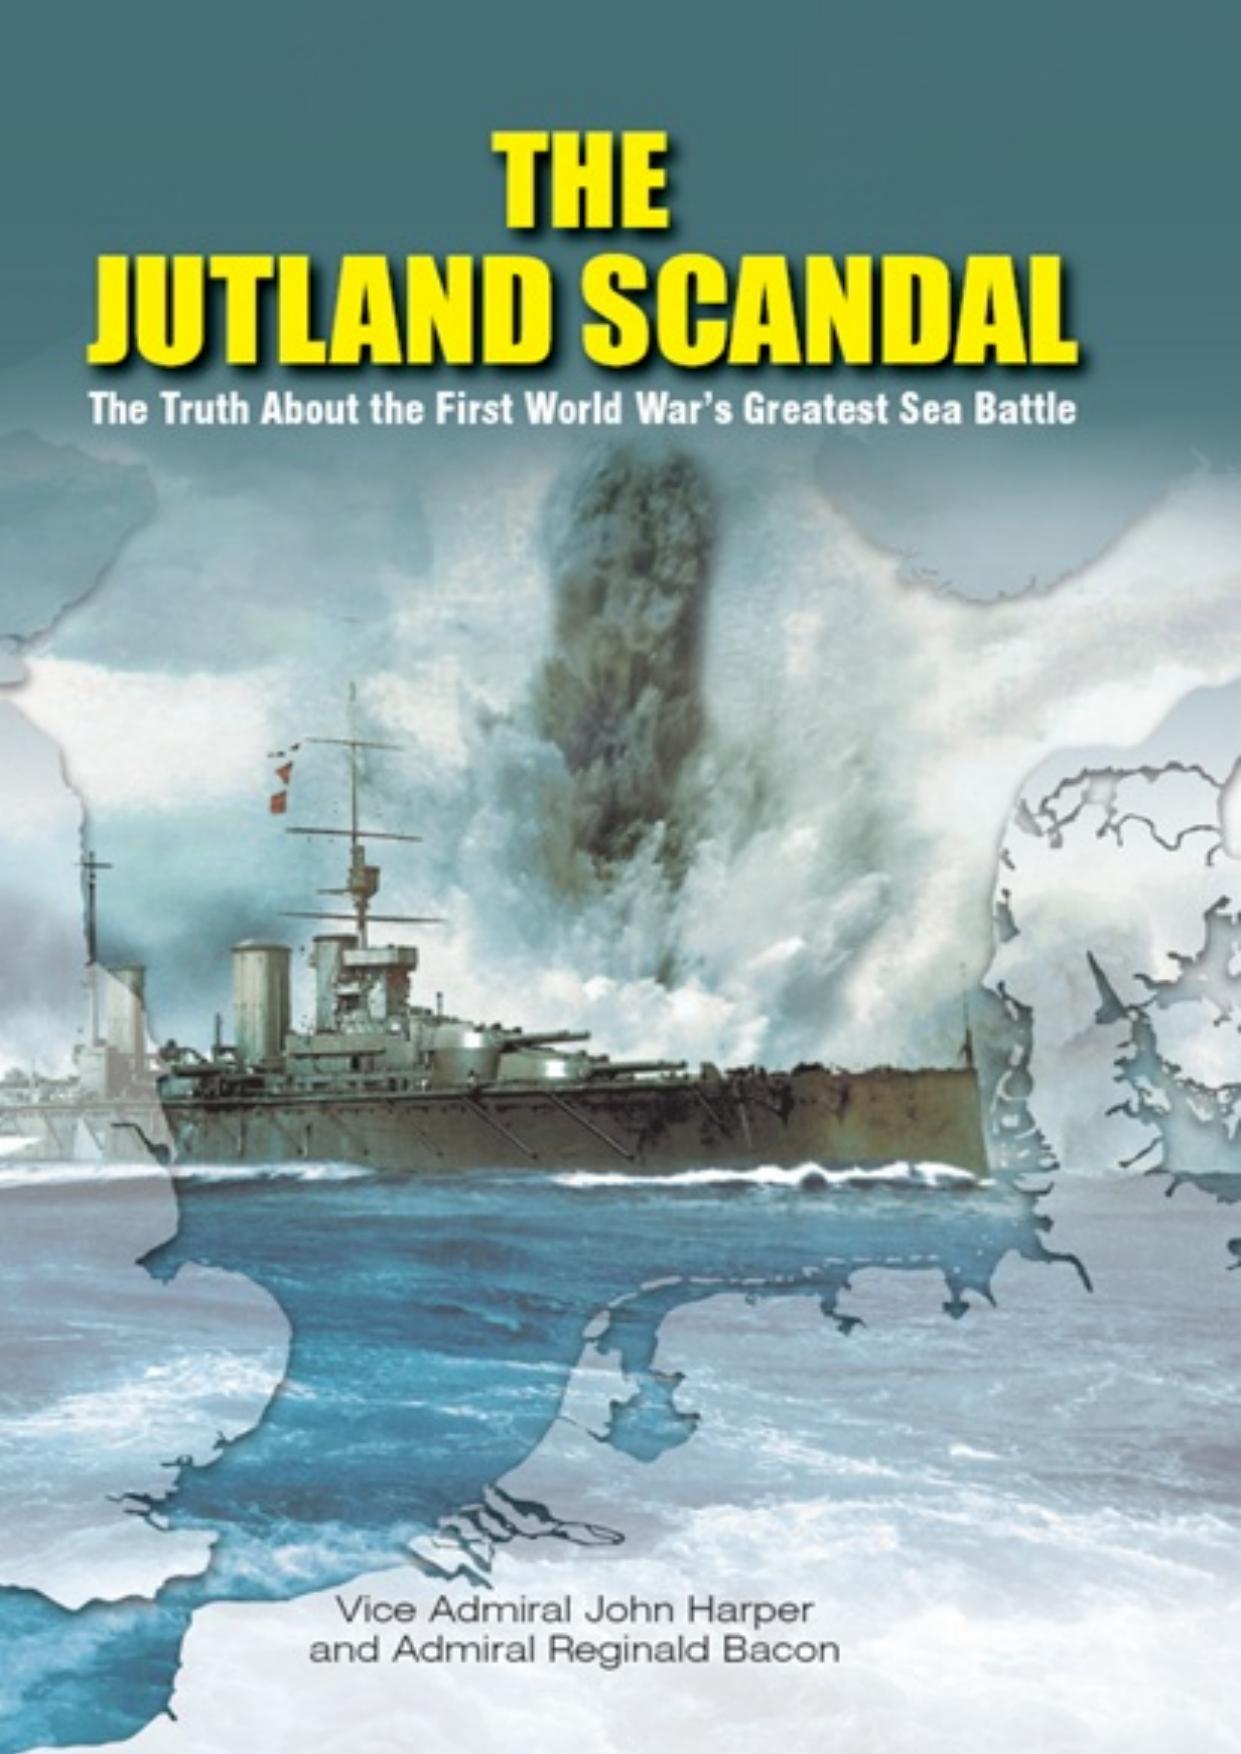 The Jutland Scandal: The Truth About the First World War's Greatest Sea Battles